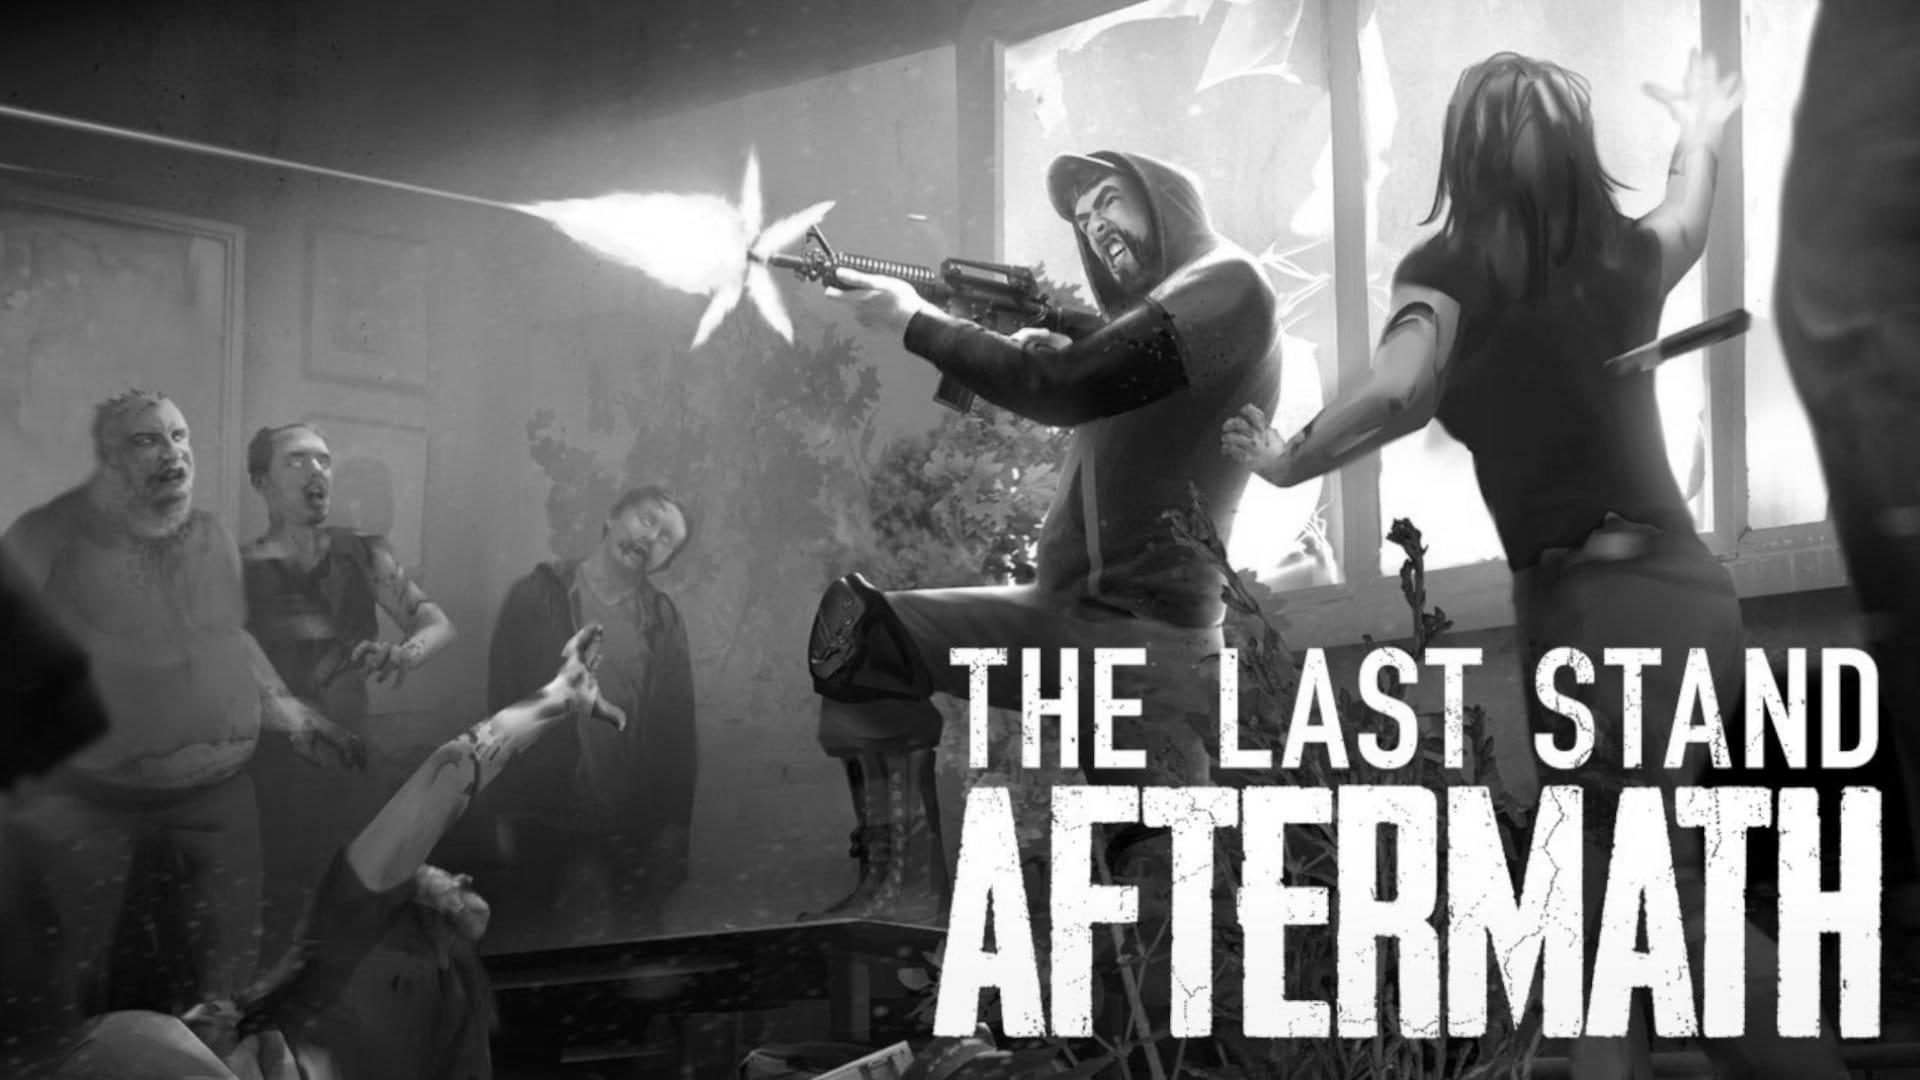 The Last Stand Review image 0